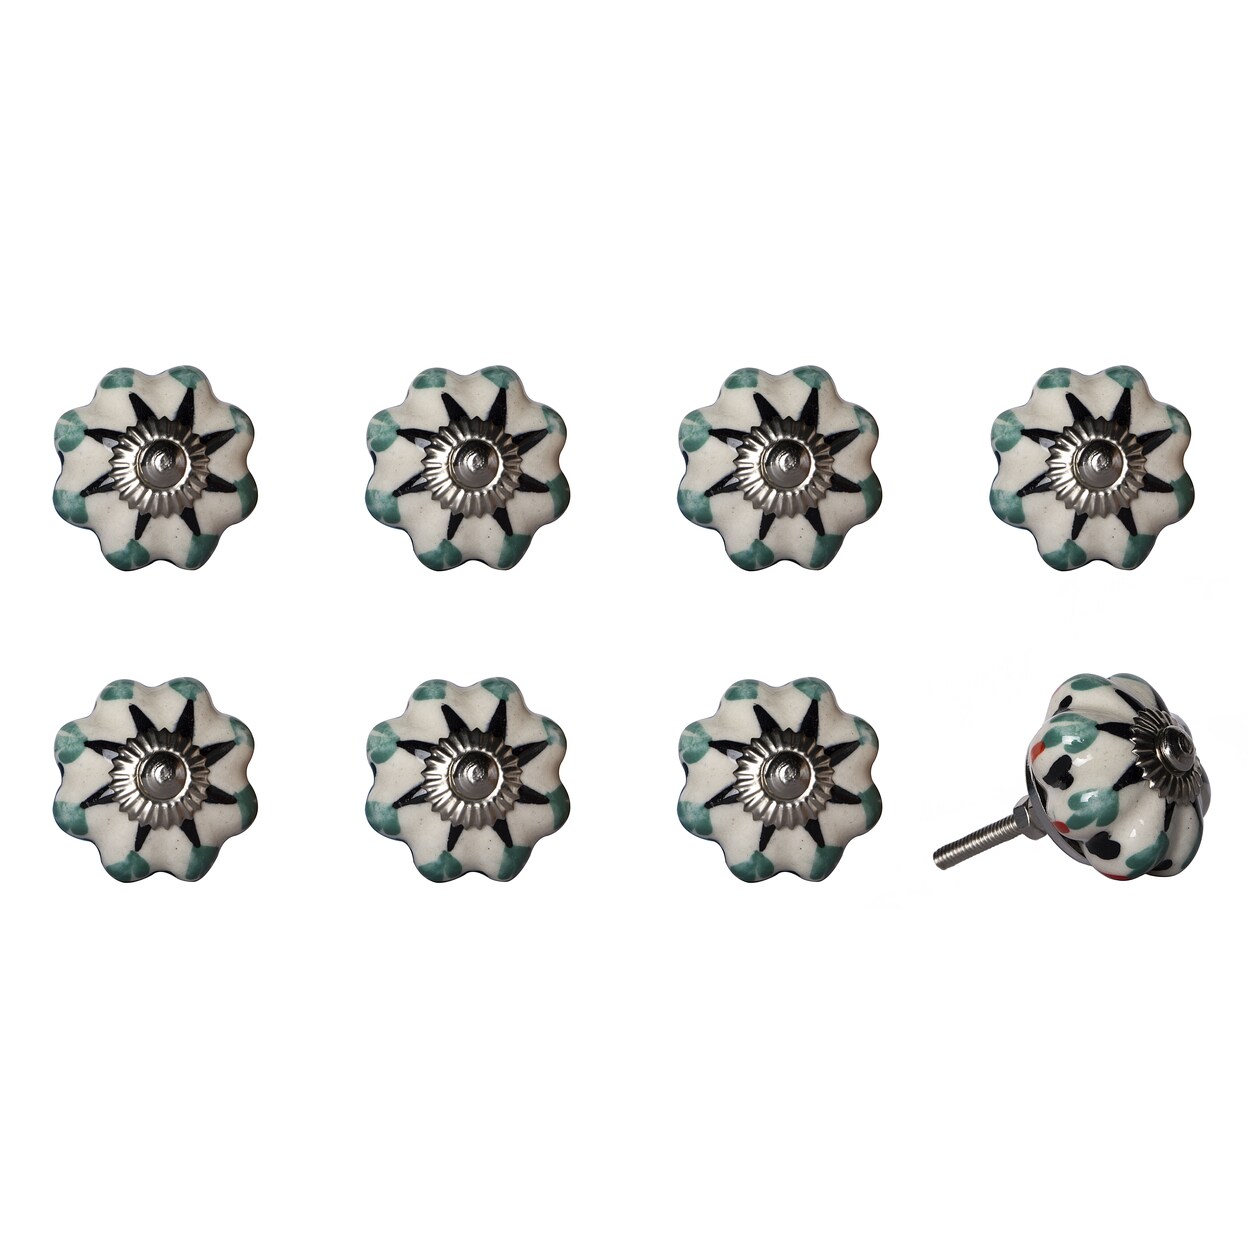 Knob-It    Classic Cabinet and Drawer Knobs  8-Piece  10